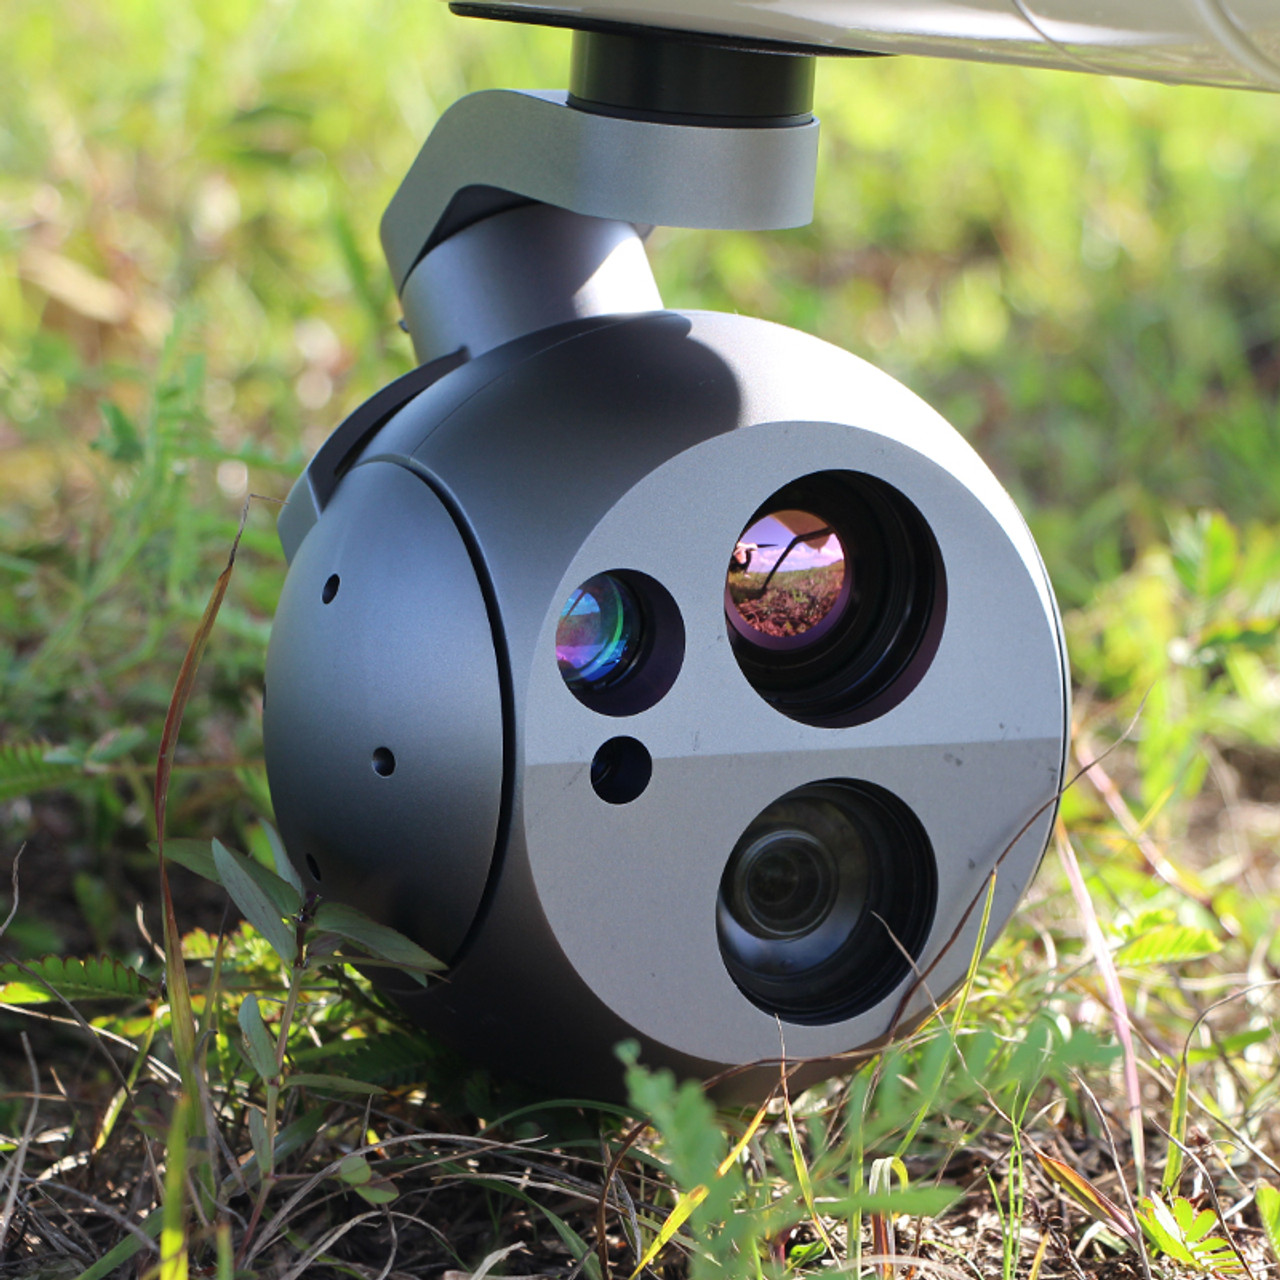 30x Drone Zoom Camera With Thermal Imager, Object Tracking And GPS